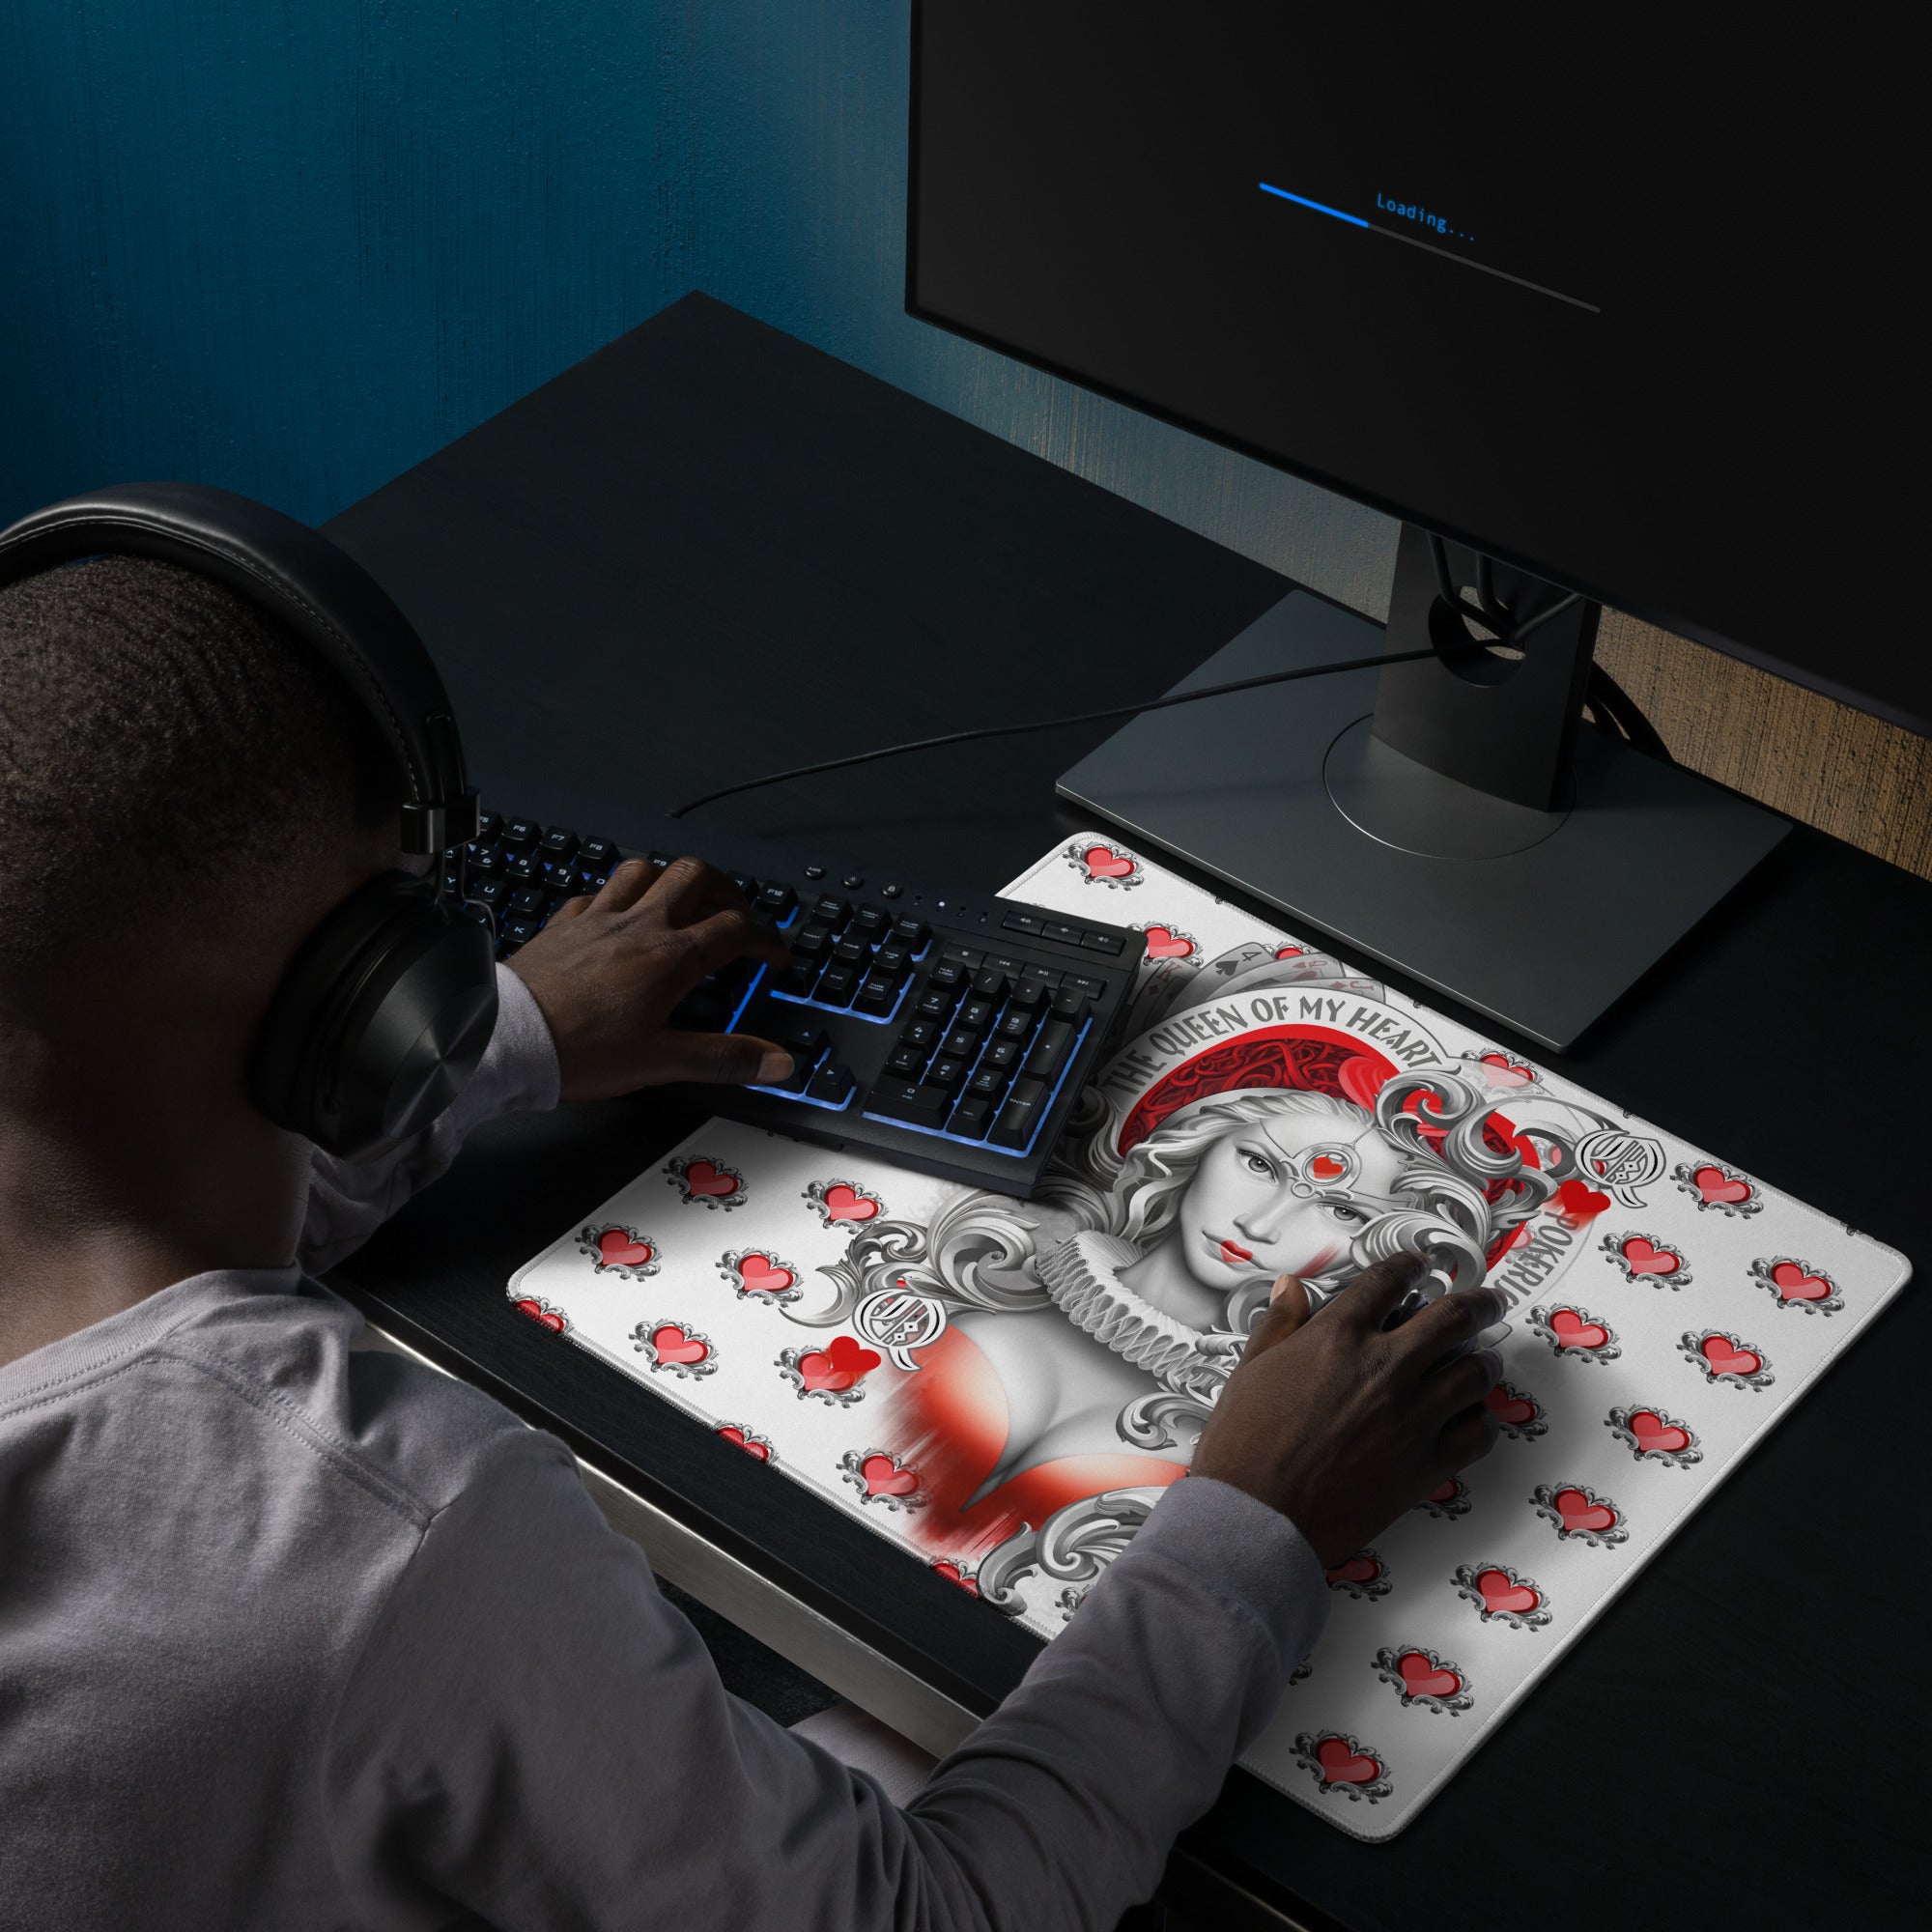 Queen Hearts - Gaming mouse pad